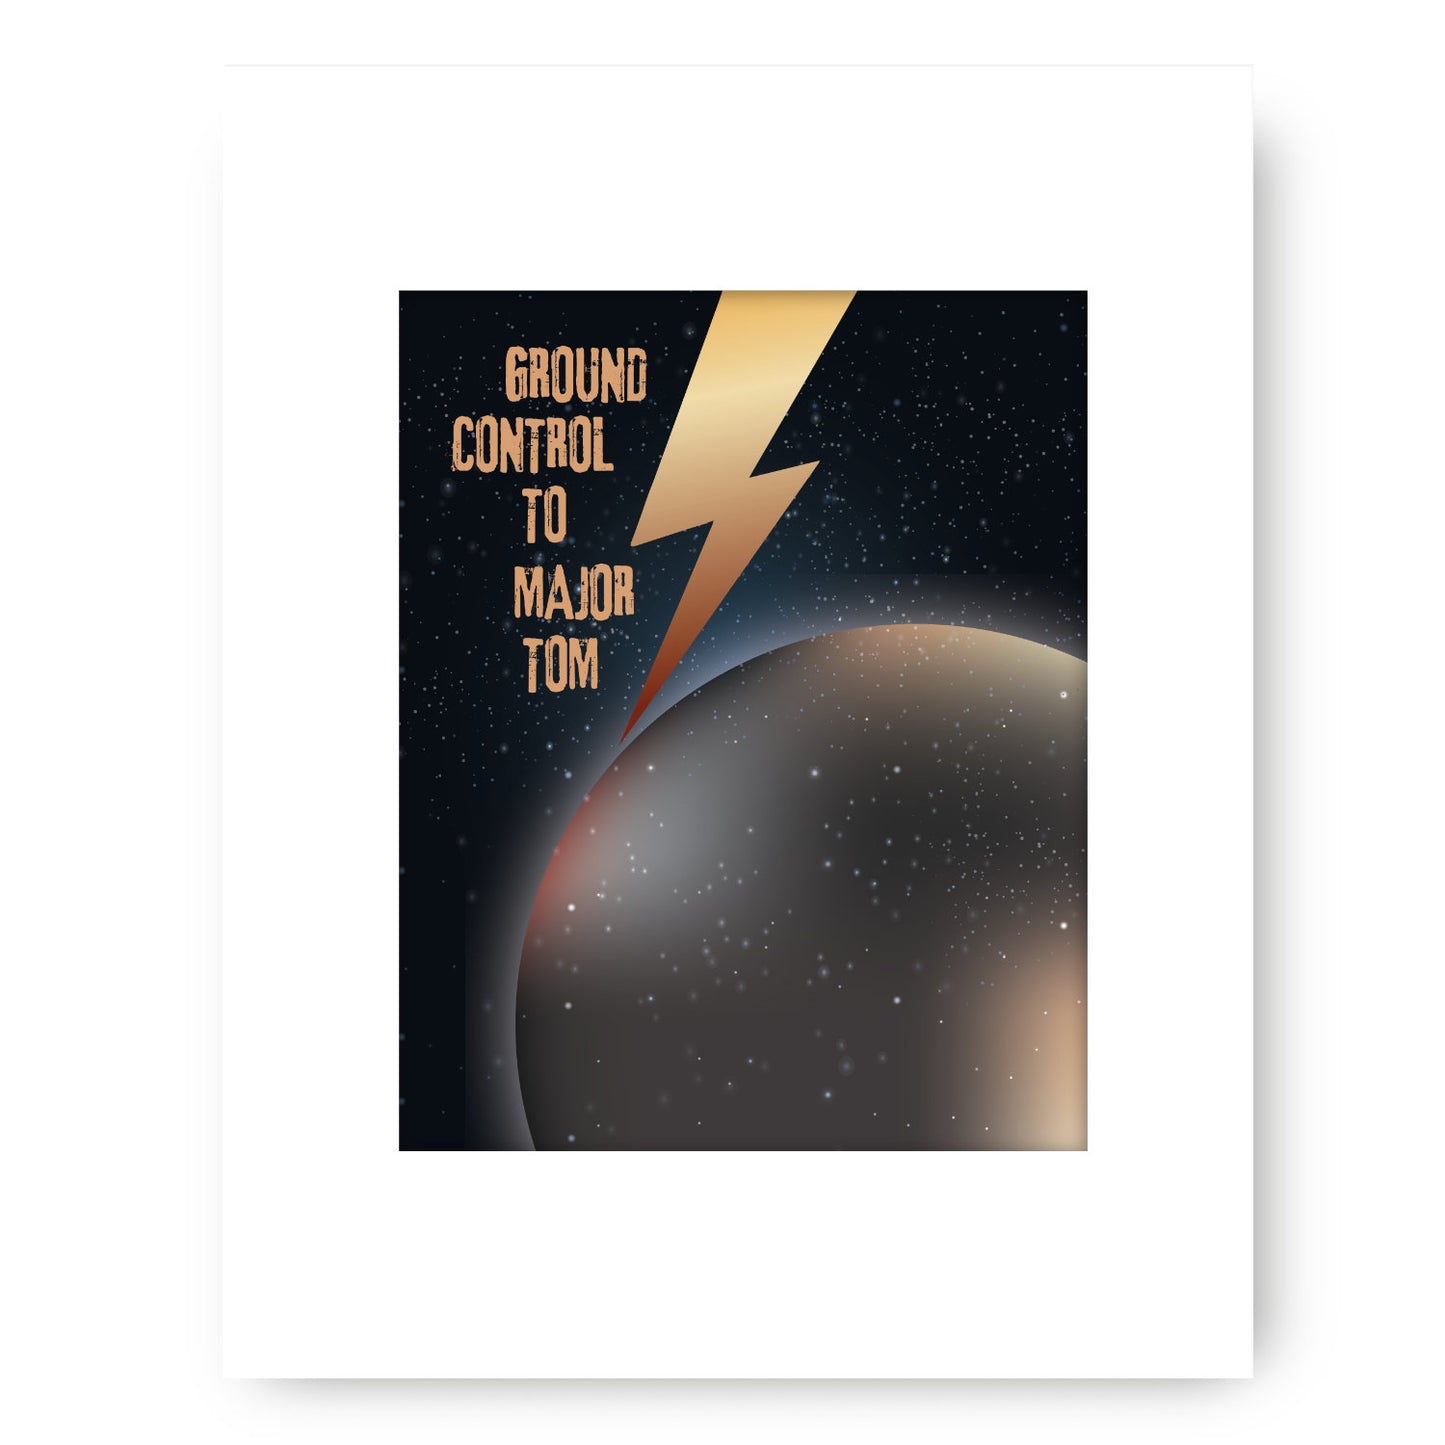 Space Oddity by David Bowie - Song Lyrics Art Print Quote